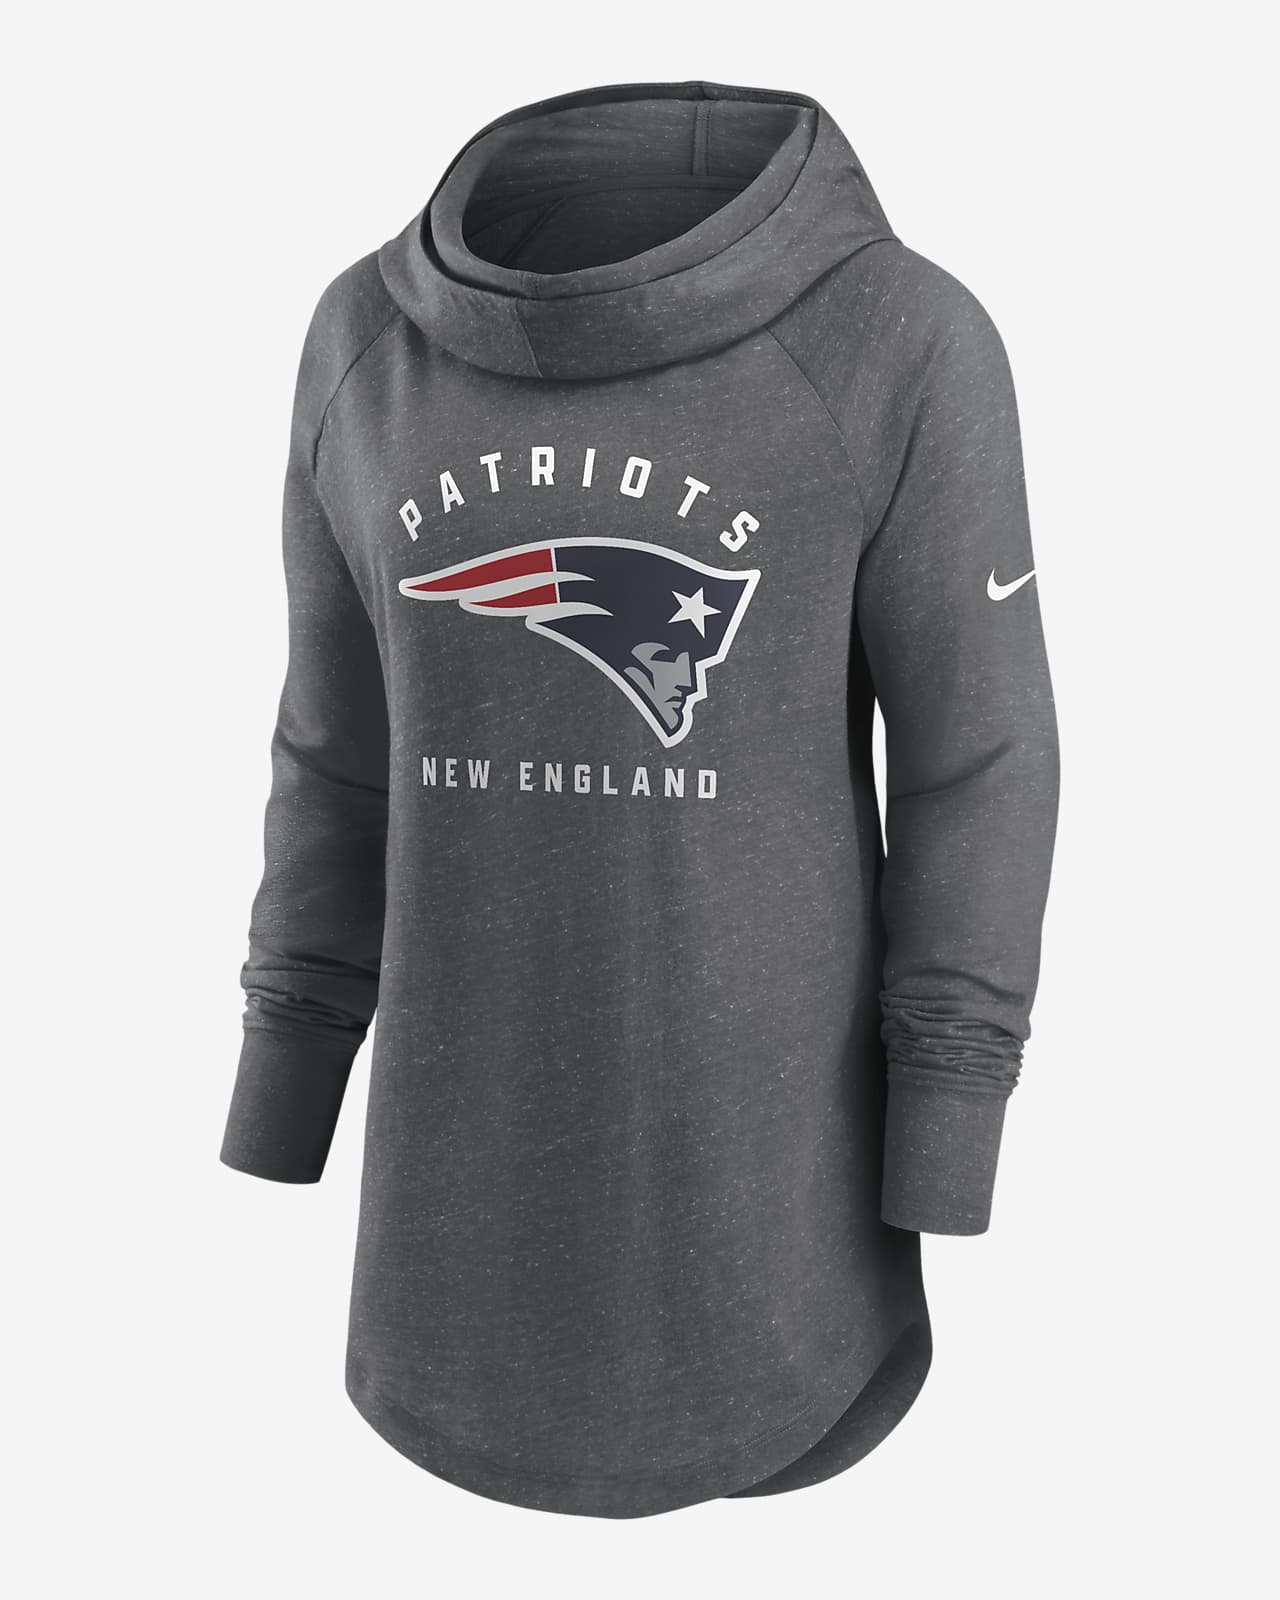 Nike Team (NFL New England Patriots) Women's Pullover Hoodie